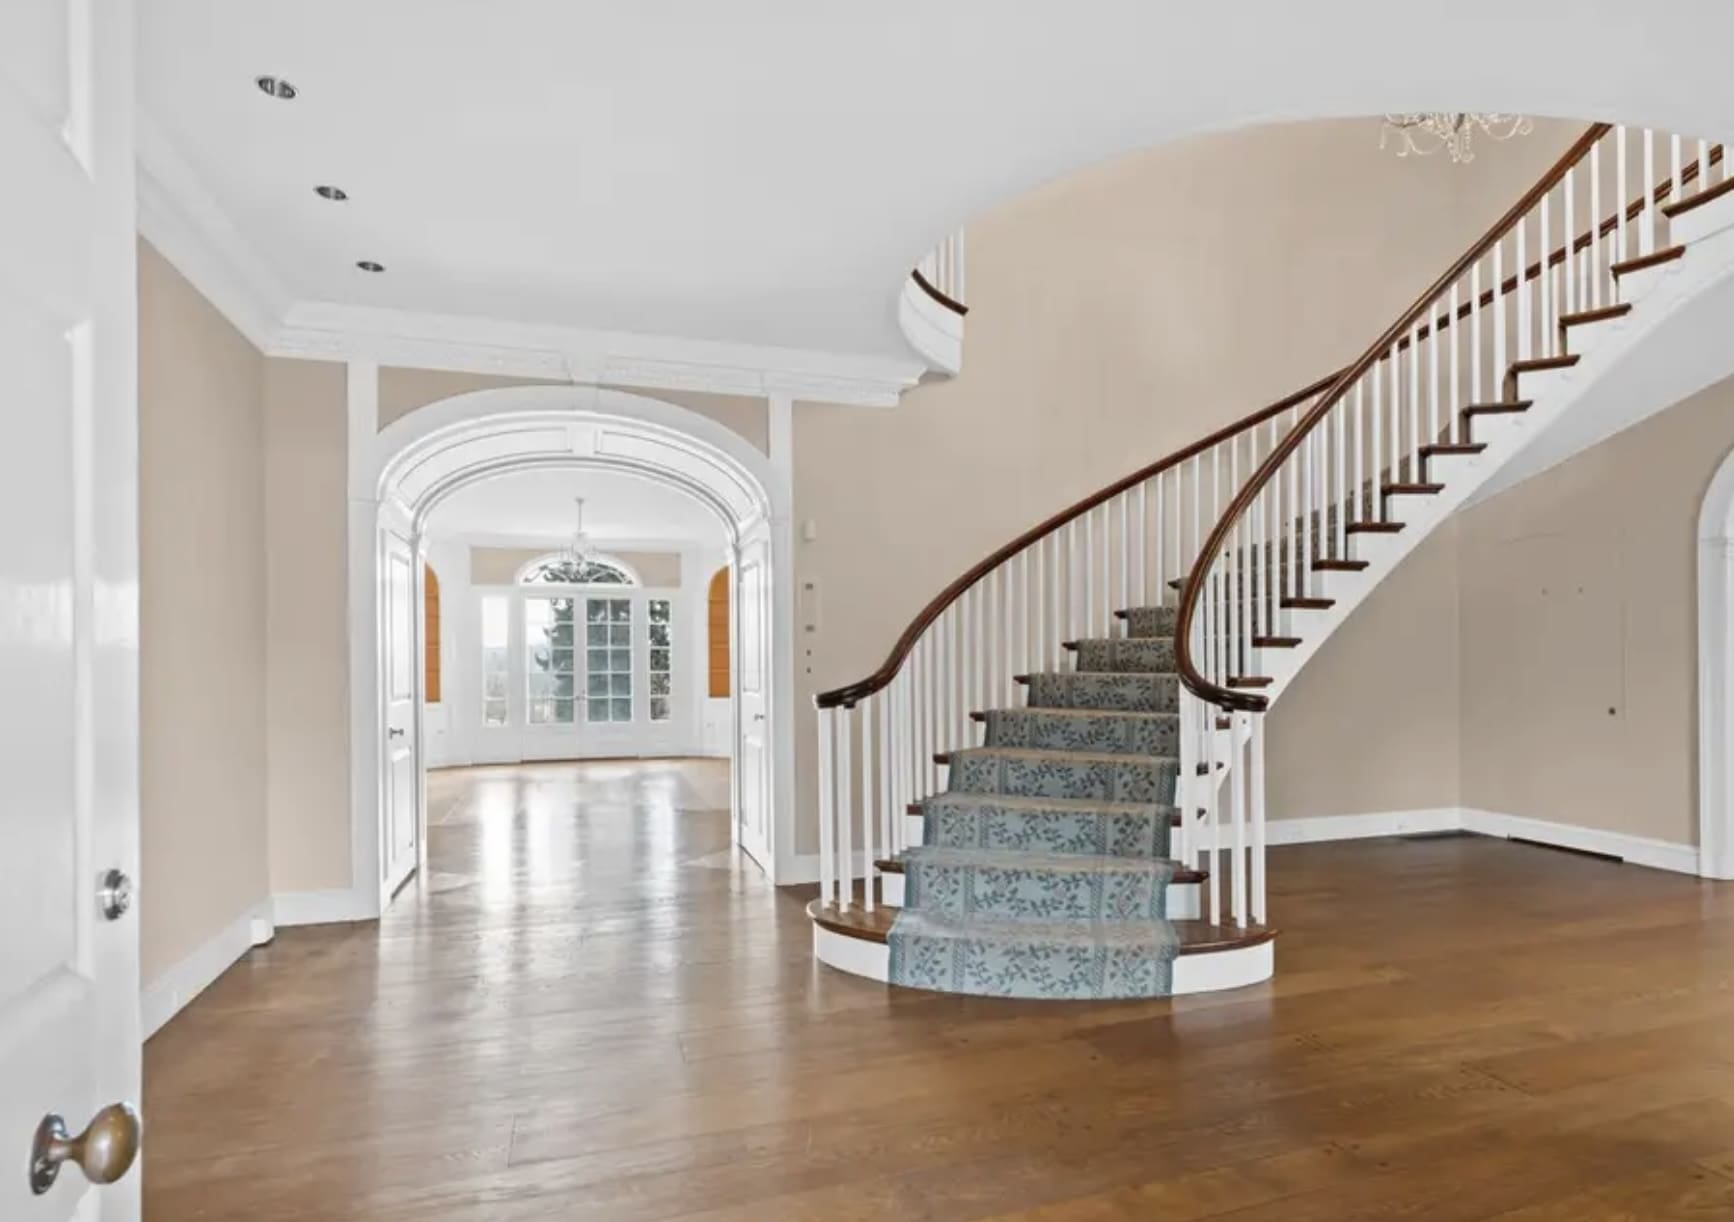 The house includes a replica of the Montmorenci staircase at Winterthur. (Courtesy of Steve Crifasi, Patterson-Schwartz Real Estate)